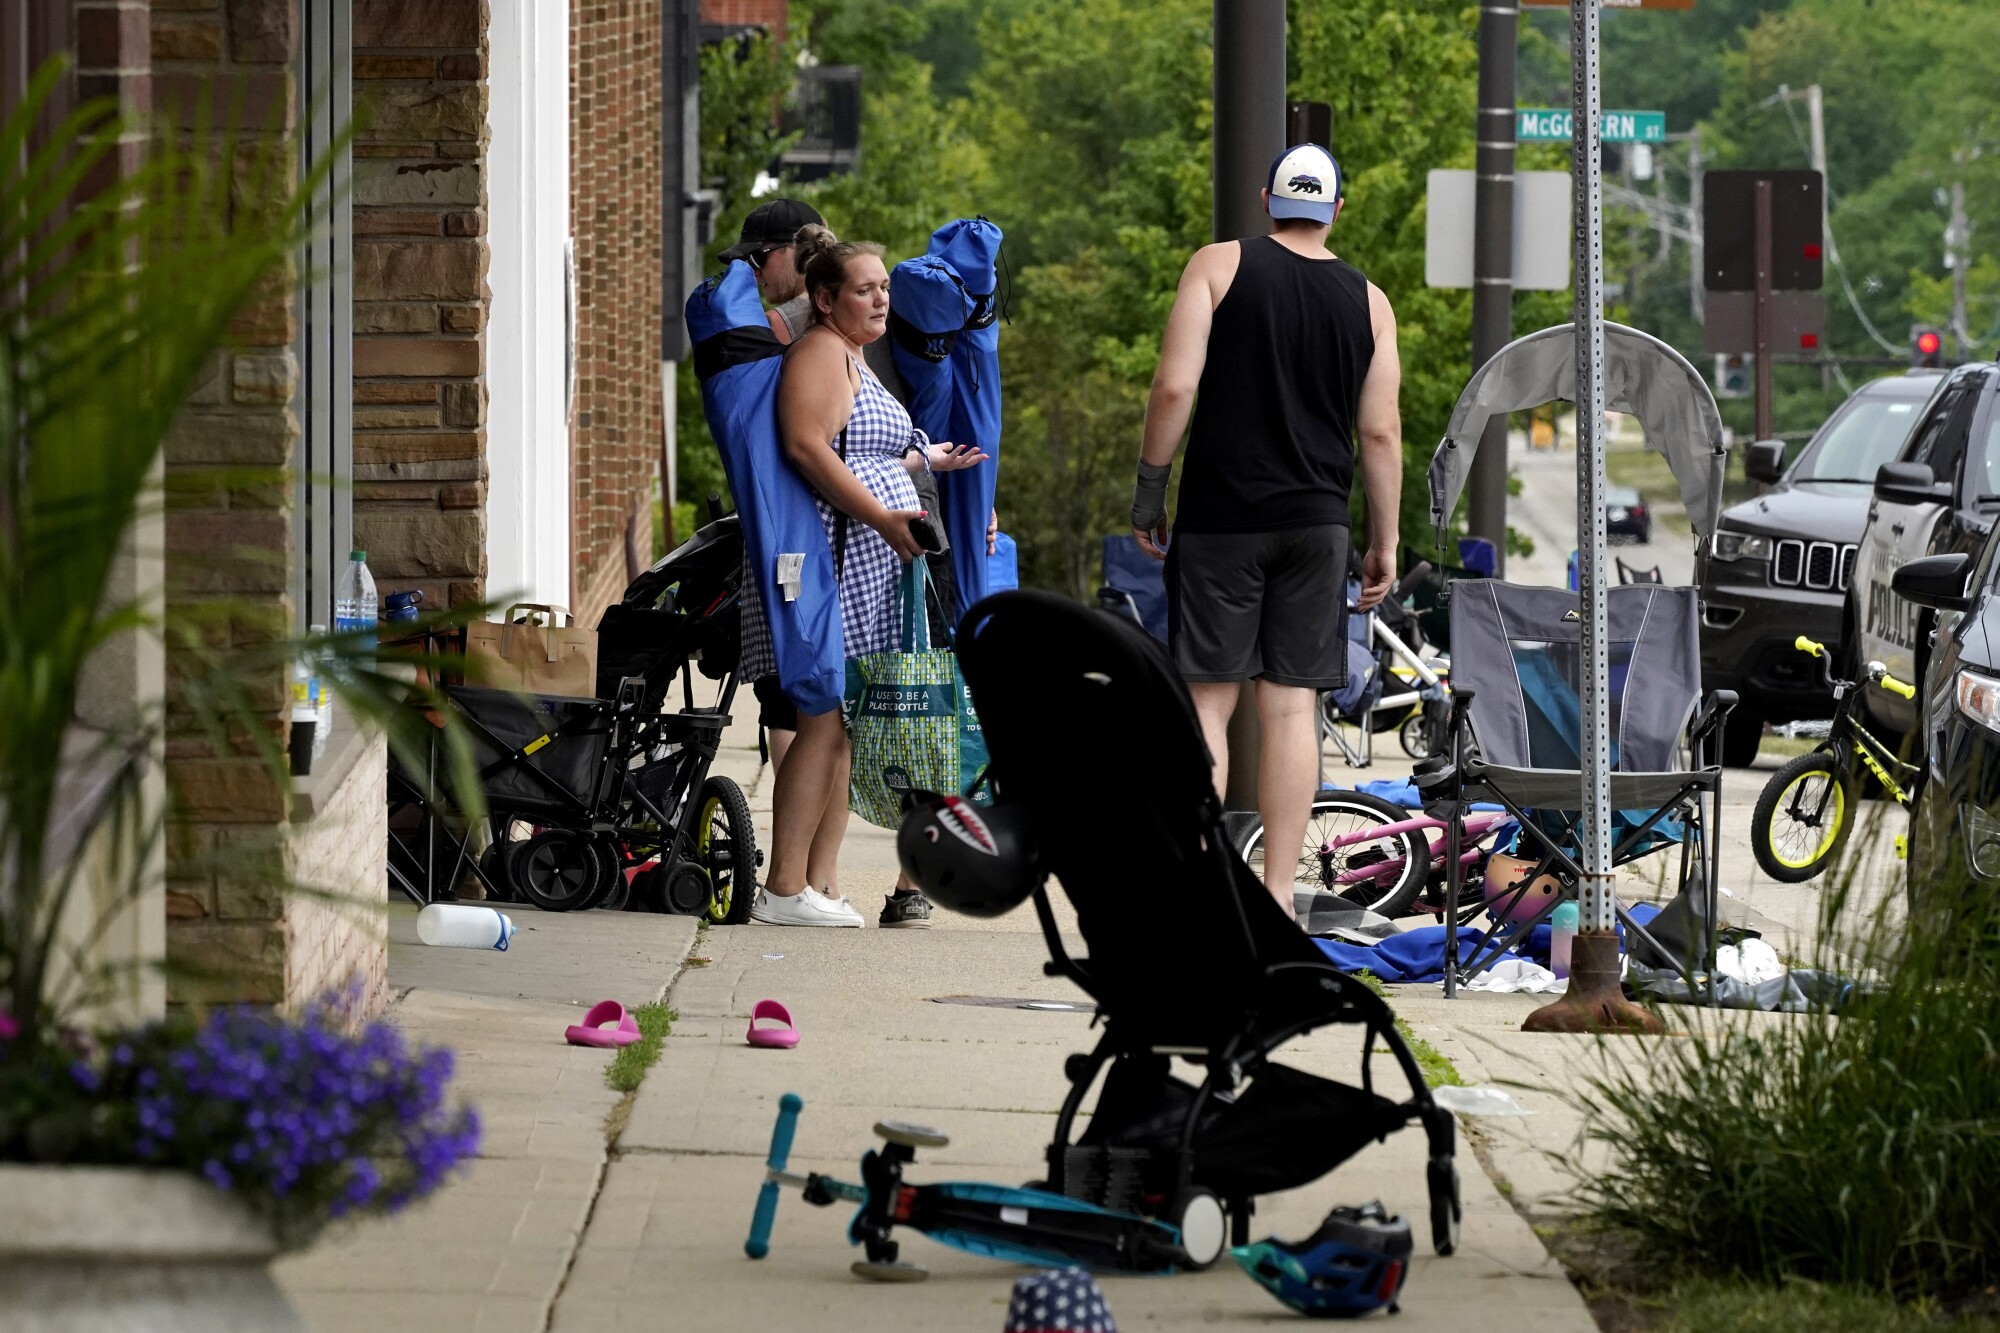 Several people stand on the sidewalk among a pile of empty chairs, strollers and scooters.